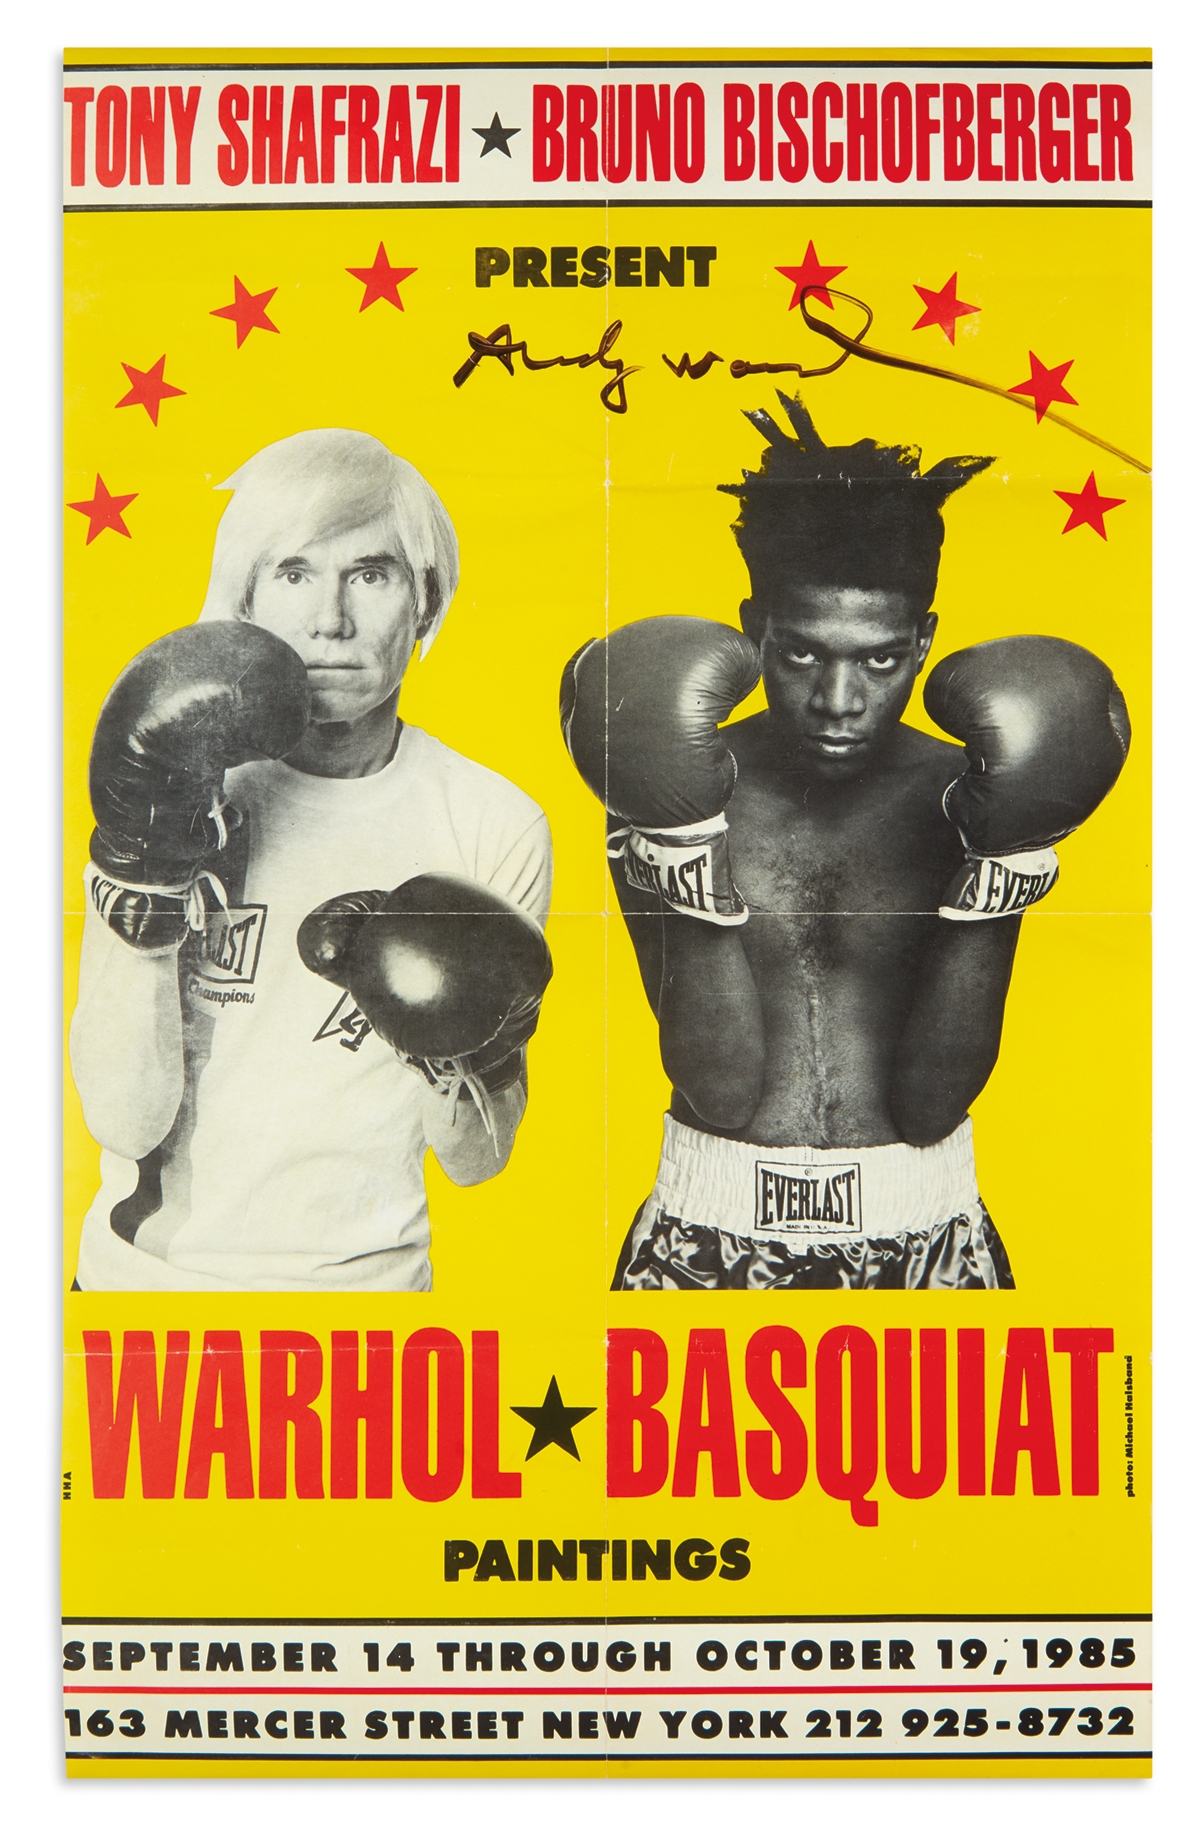 Warhol-Basquiat exhibition at the Tony Shafrazi Gallery. by Andy Warhol, 1985